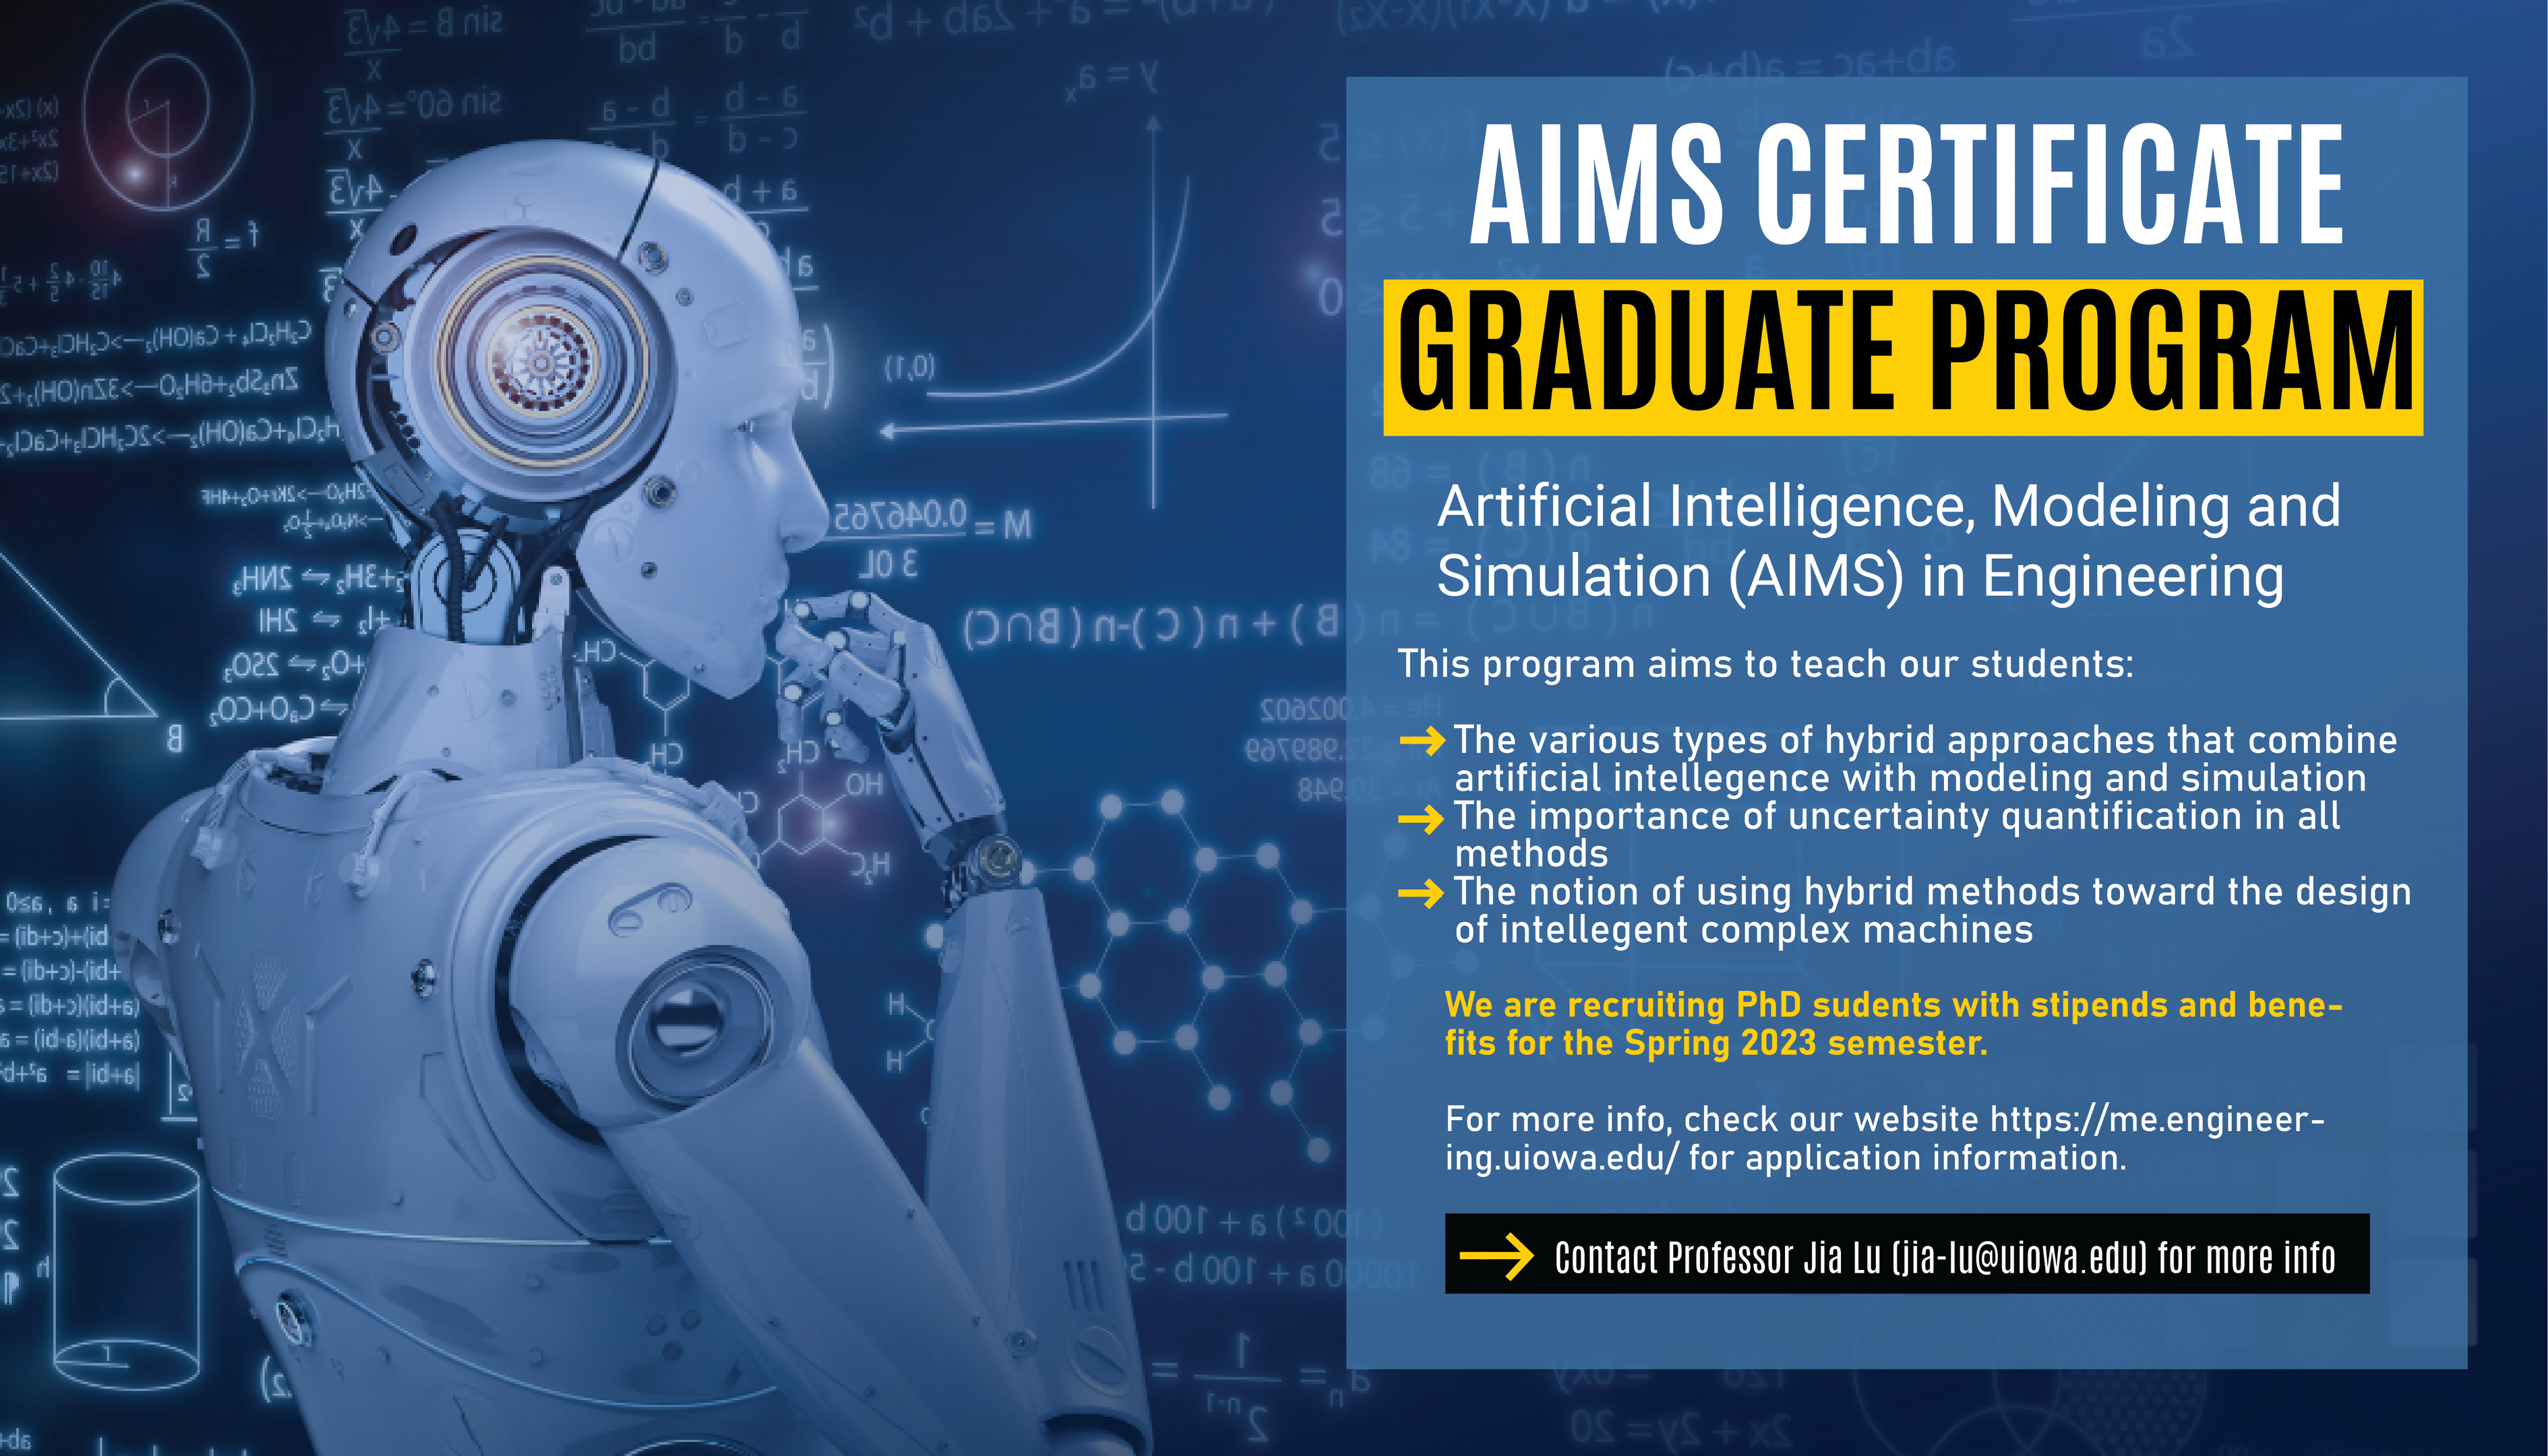 A look at the AIMS Graduate Certificate that is offered here at the University of Iowa